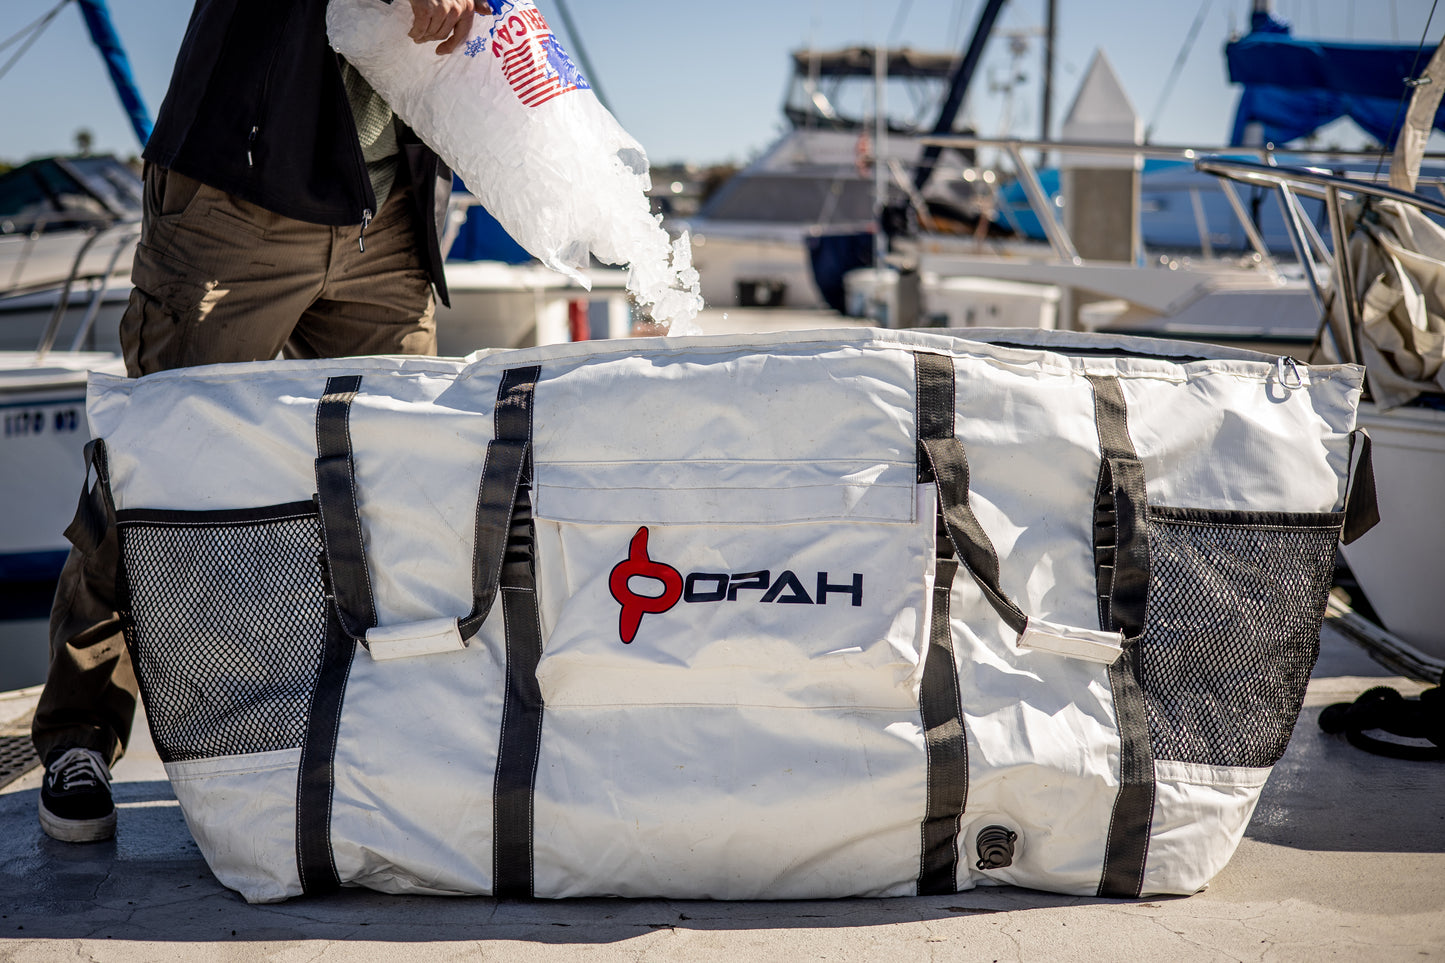 Opah Gear Fathom 6 Fish Cooler Bag Kill Bag. Protects your catch longer. The most reliable fish bag on the market. Purposely built to be the highest quality fish cooler bag in sportfishing. Even great when used as an insulated cooler bag while out camping or for other normal use. The highest quality insulated bag. A perfect Tuna Kill Bag, Dorado Kill bag, or yellowtail kill bag.